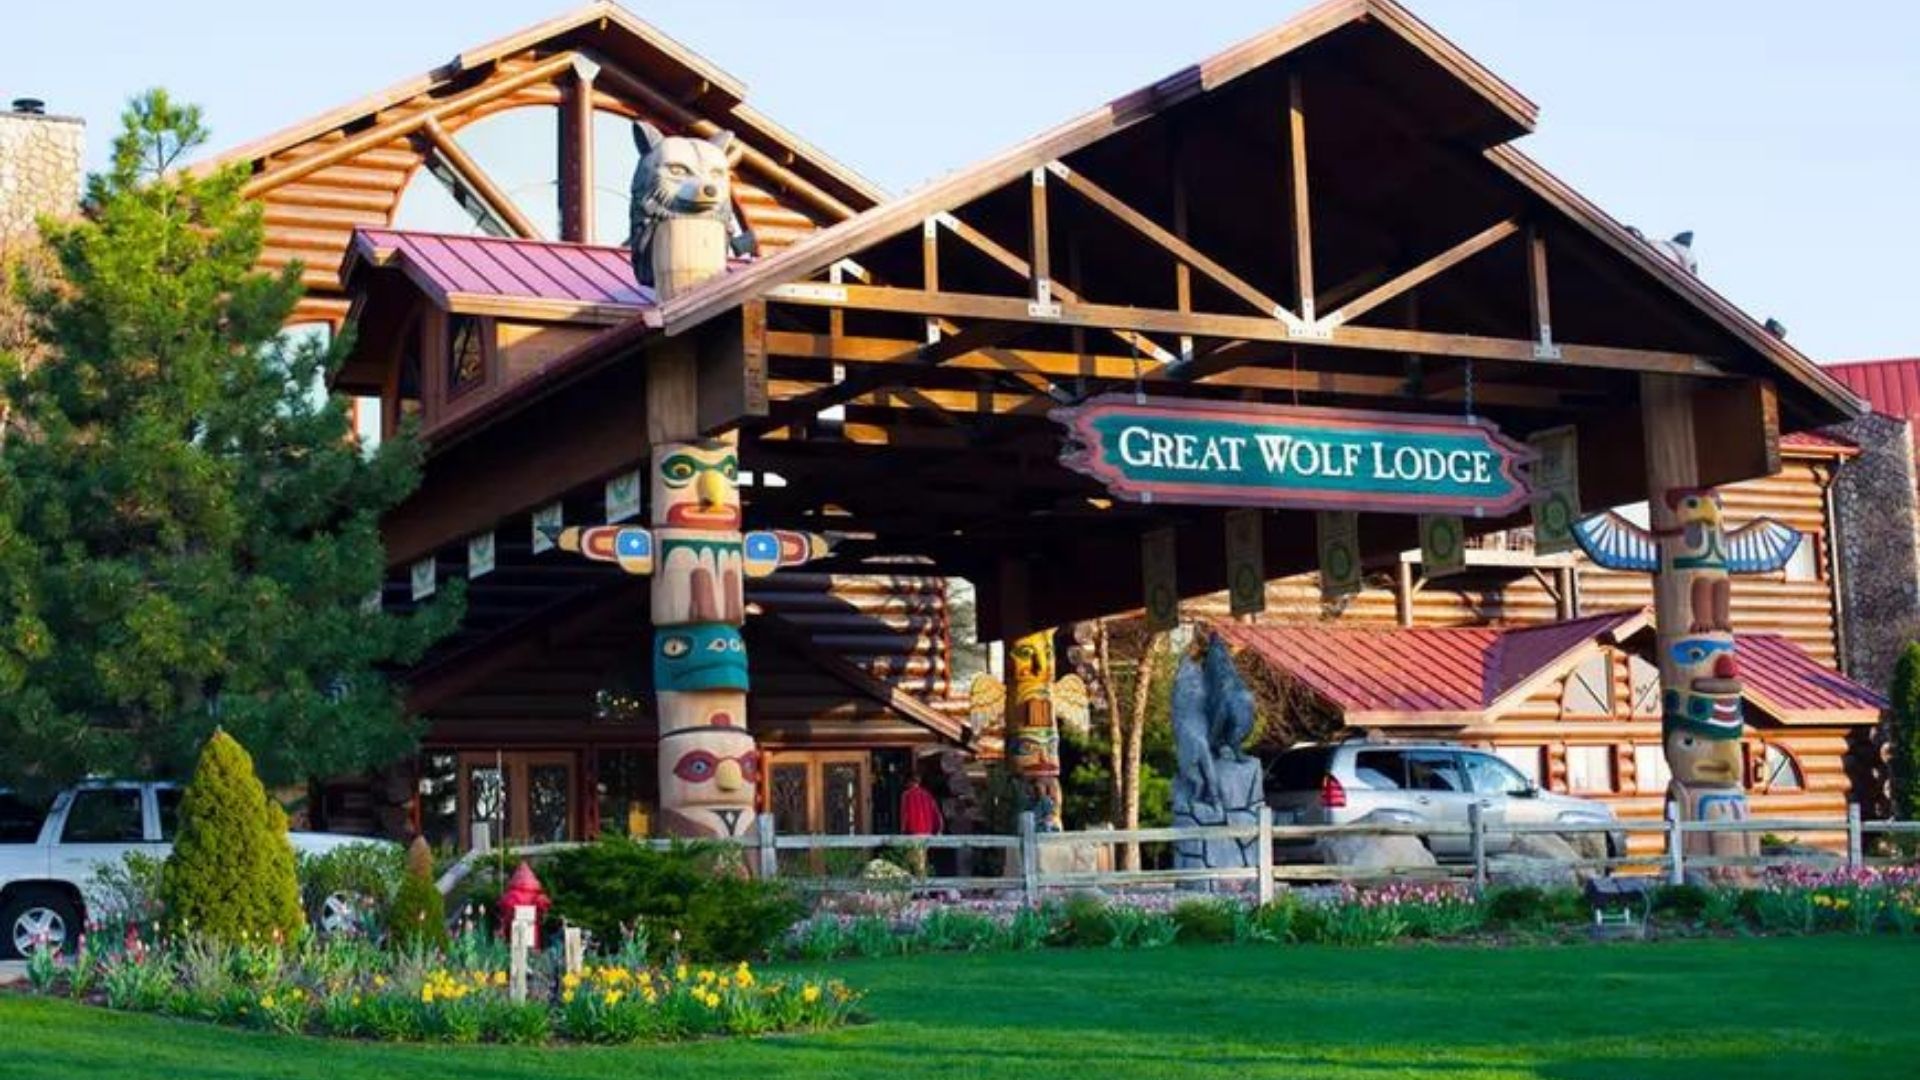 55 Off The Best Great Wolf Lodge Deals The Freebie Guy®